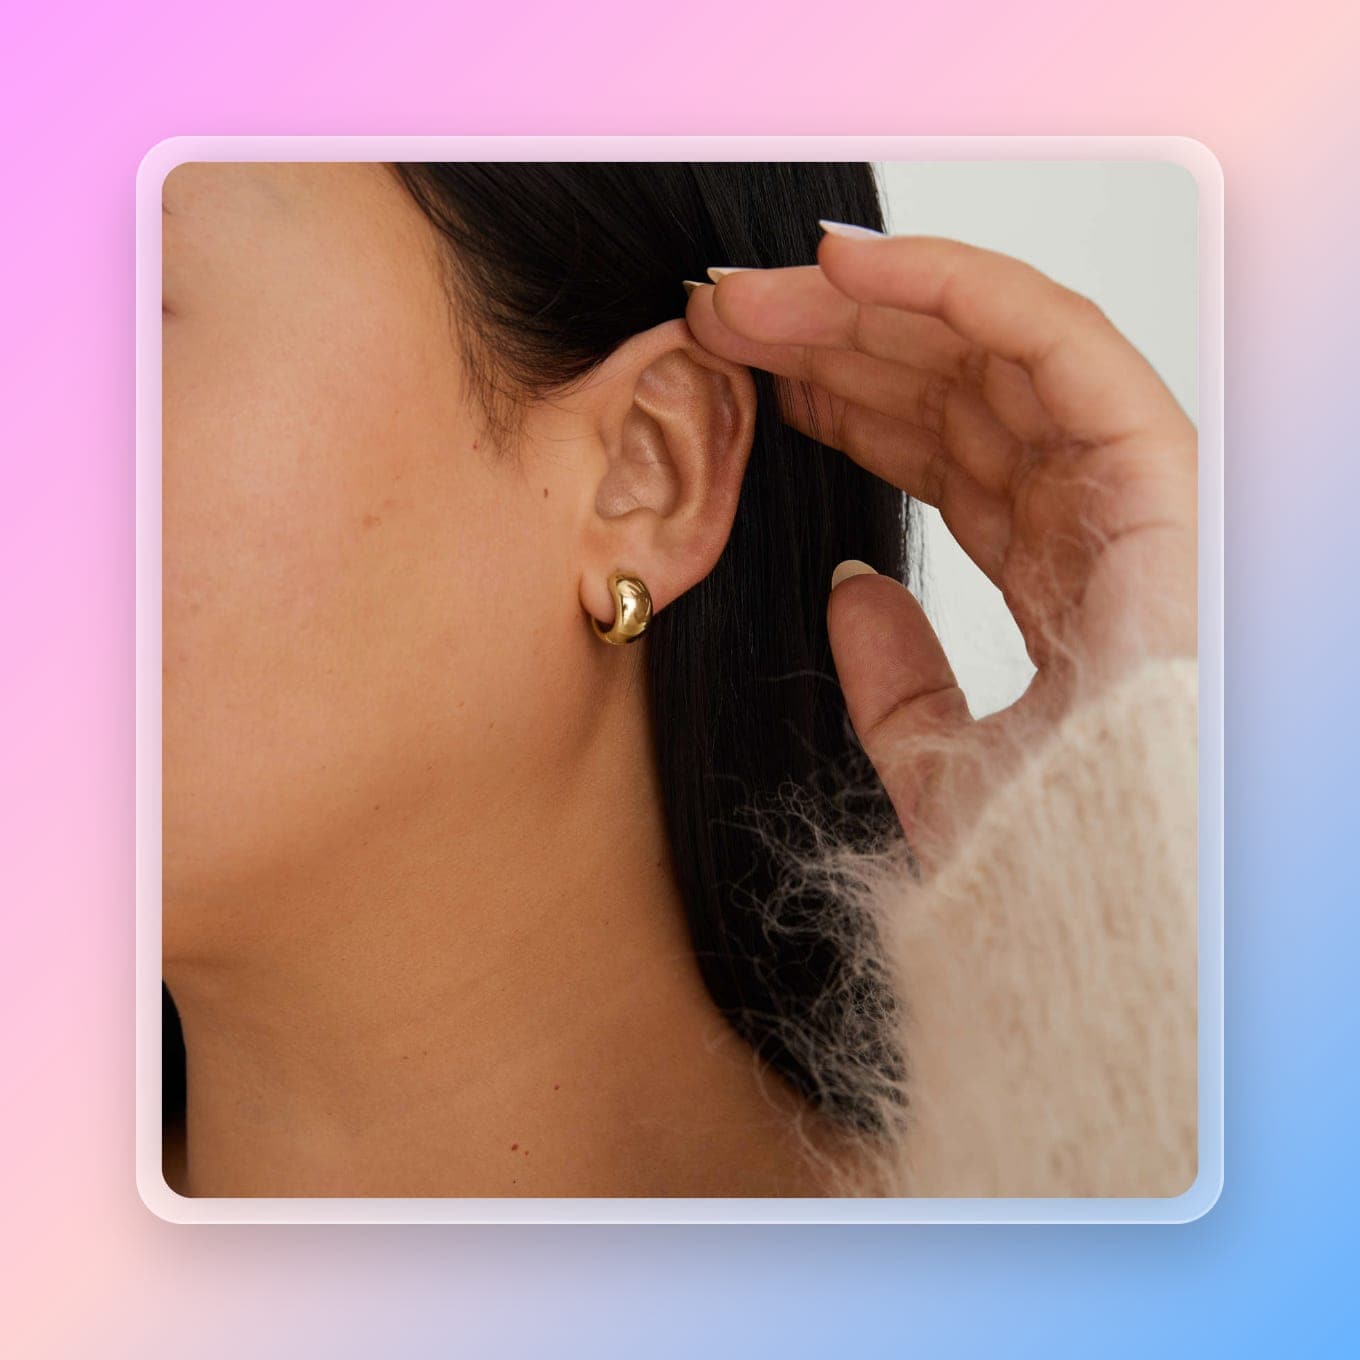 A woman wearing chunky gold hoops in her ears